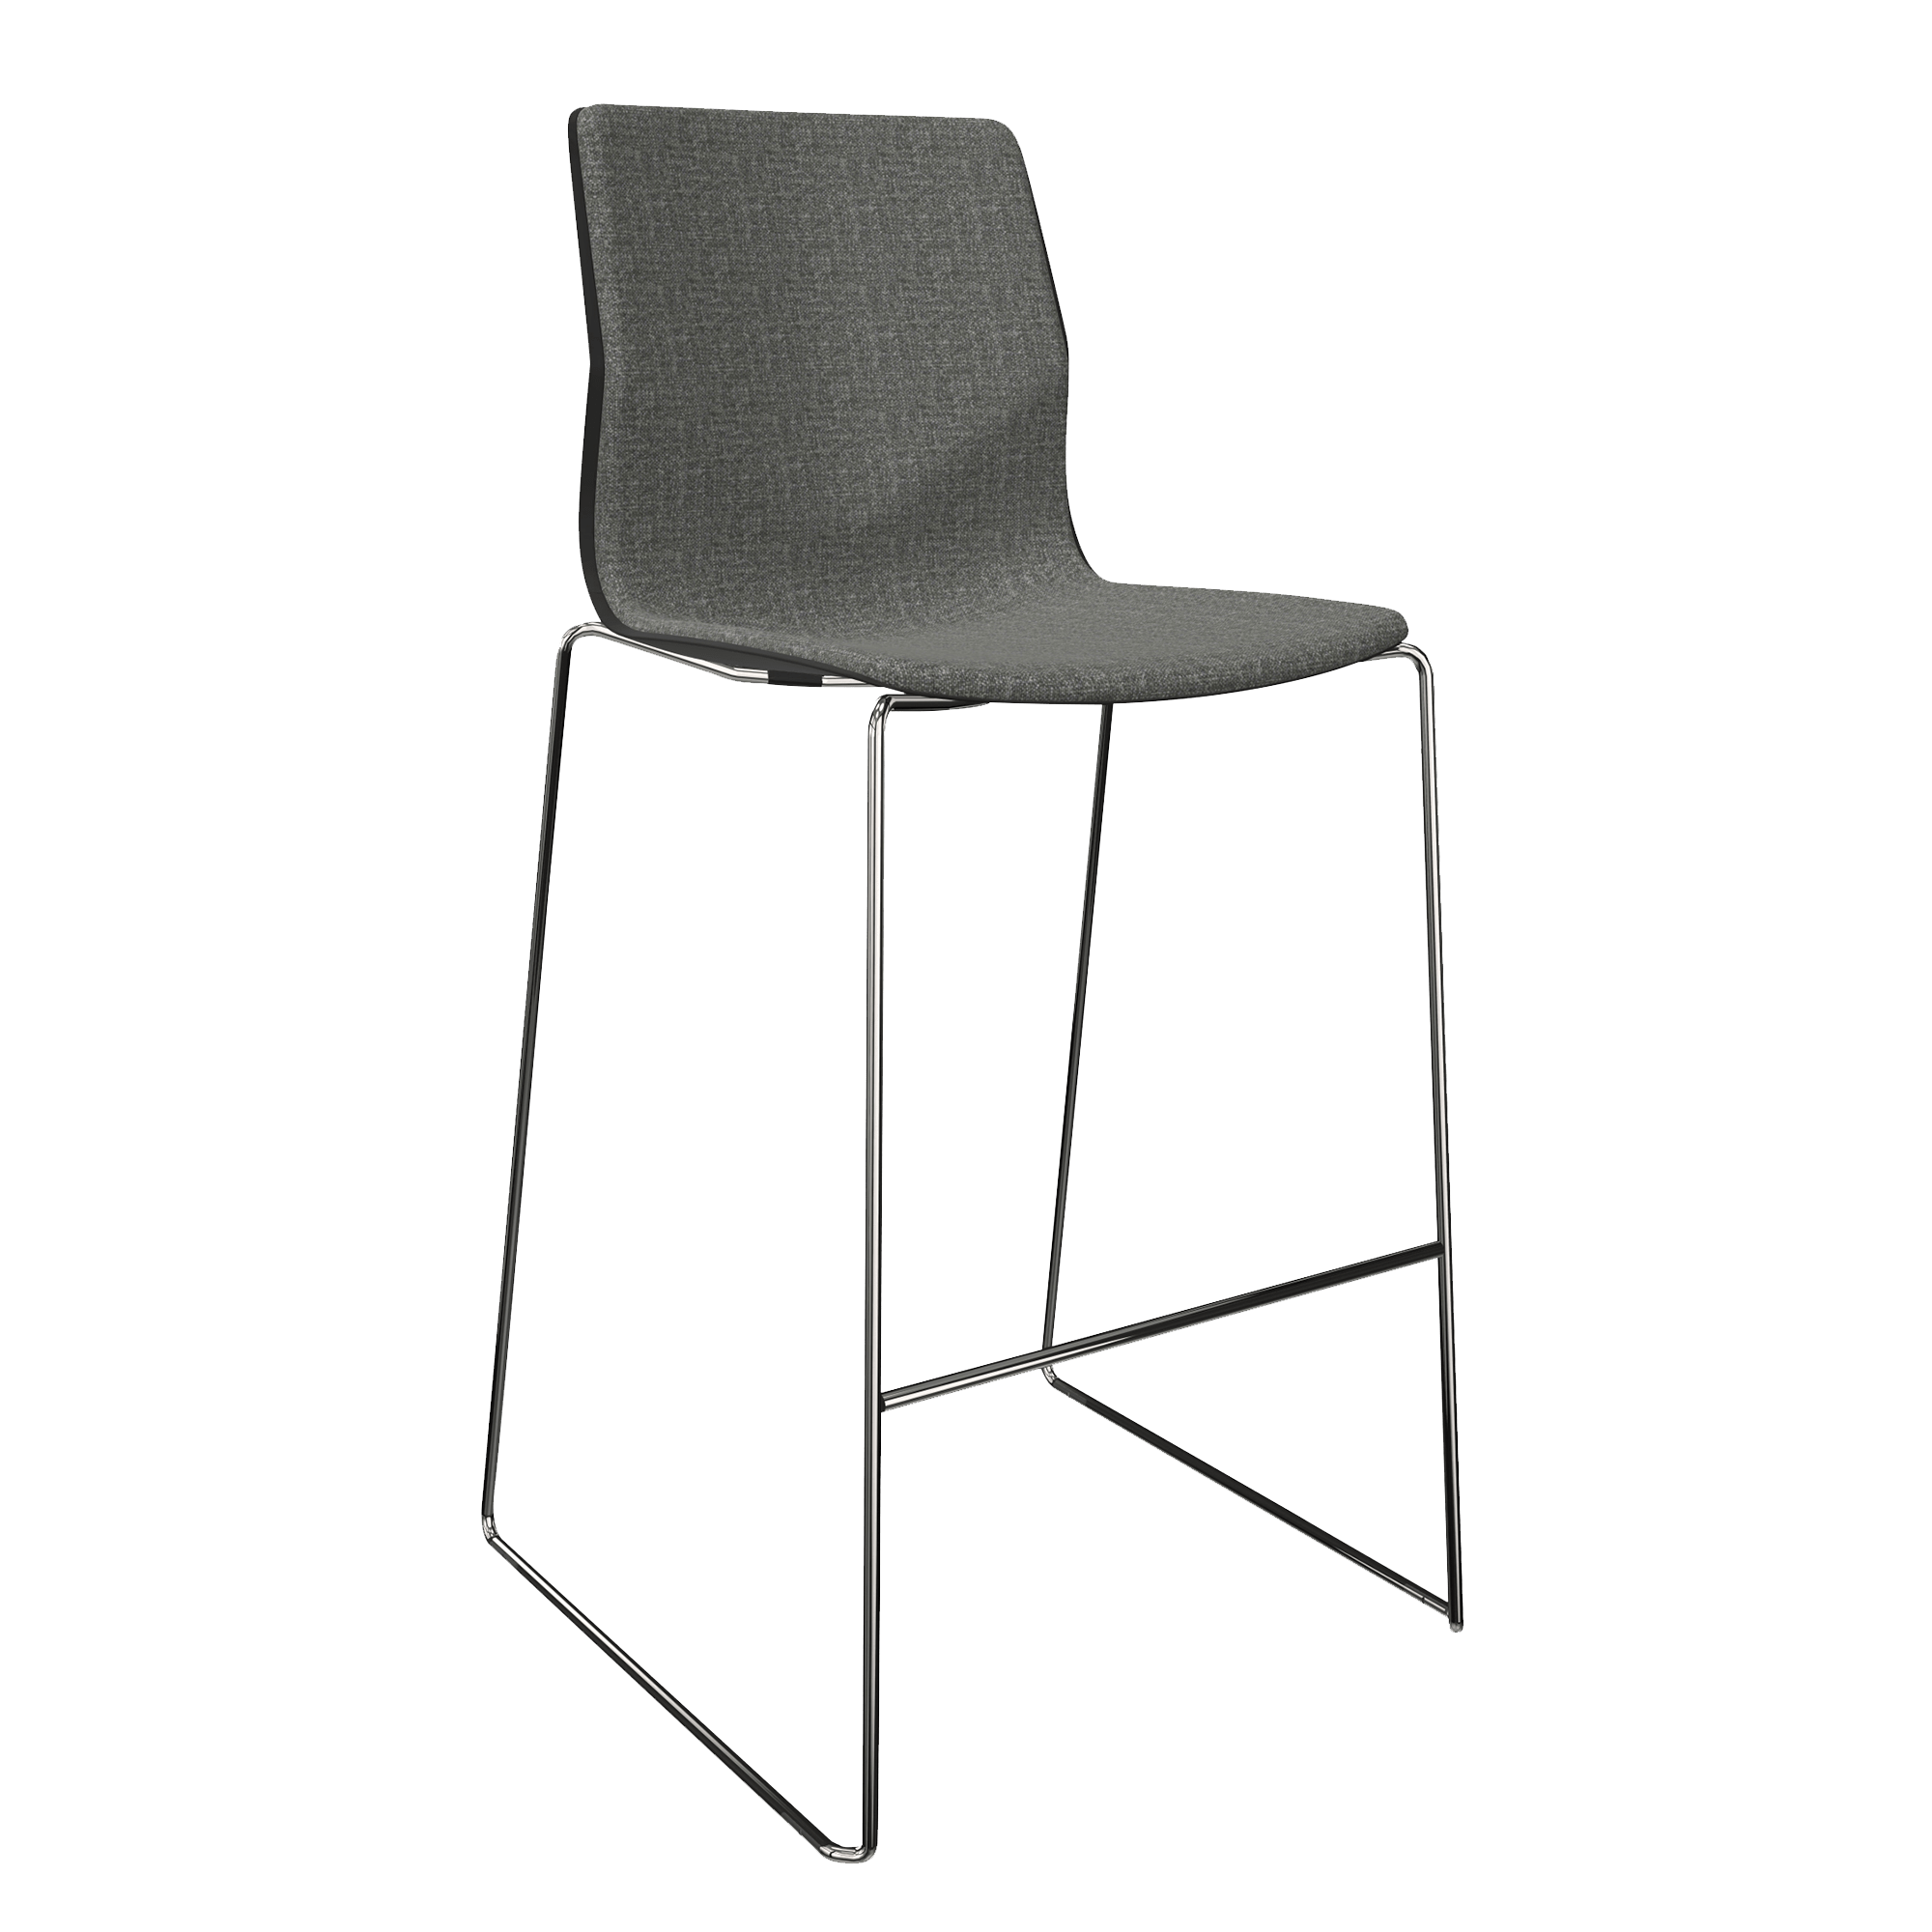 A grey counter chair with 2 chrome legs